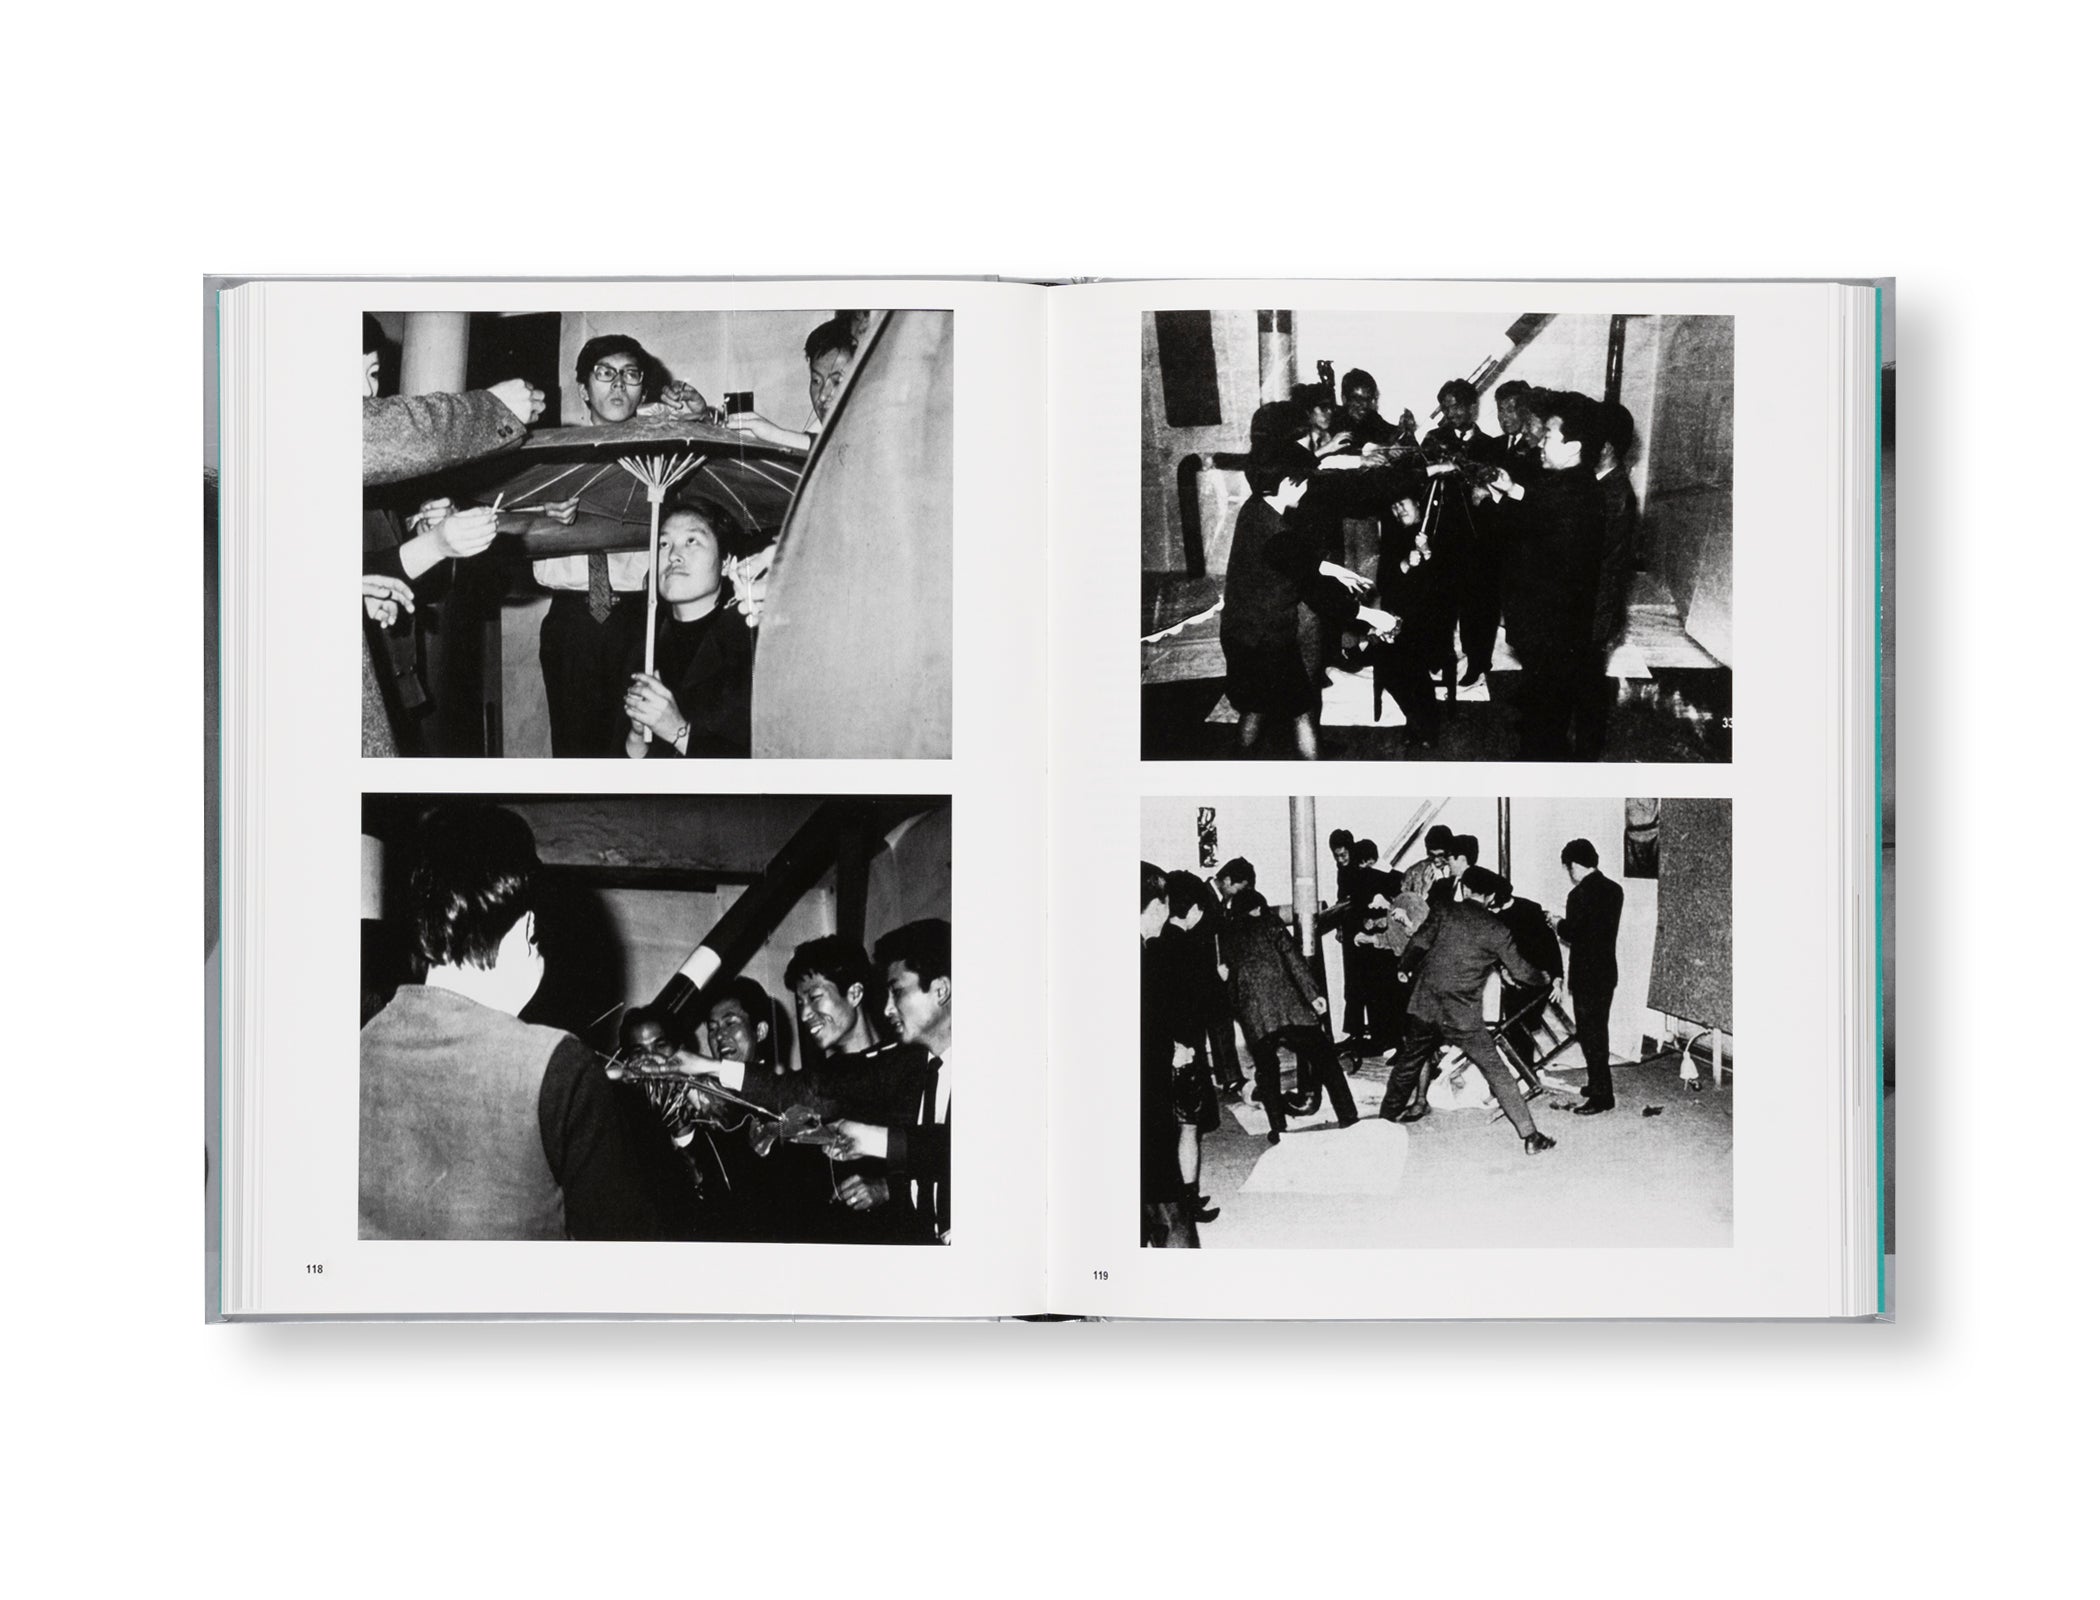 ONLY THE YOUNG: EXPERIMENTAL ART IN KOREA, 1960S–1970S